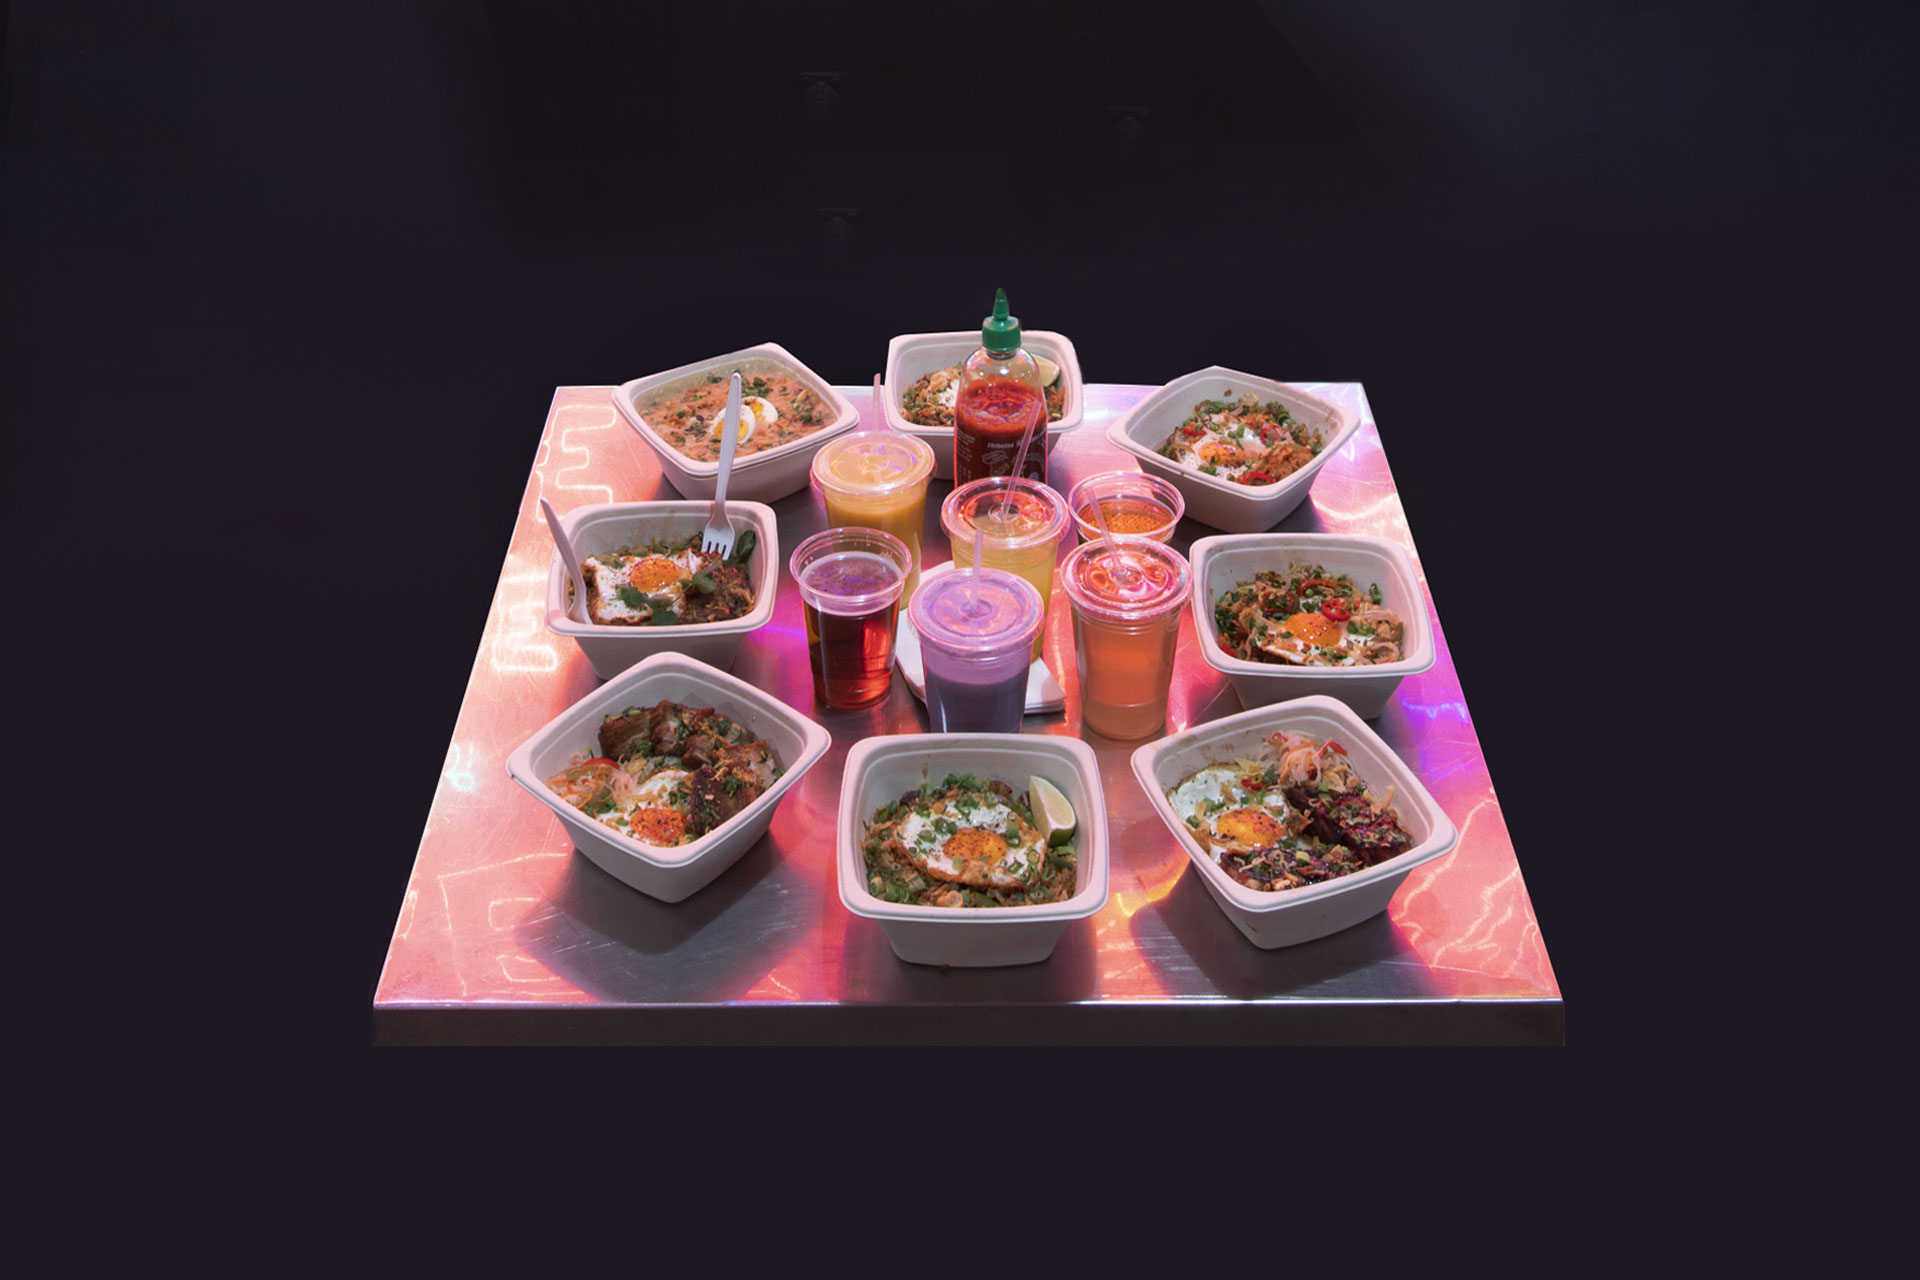 an assortment of sari sari rice bowls, beers, and juices on a stainless steel table reflecting the colors from the neon sign above